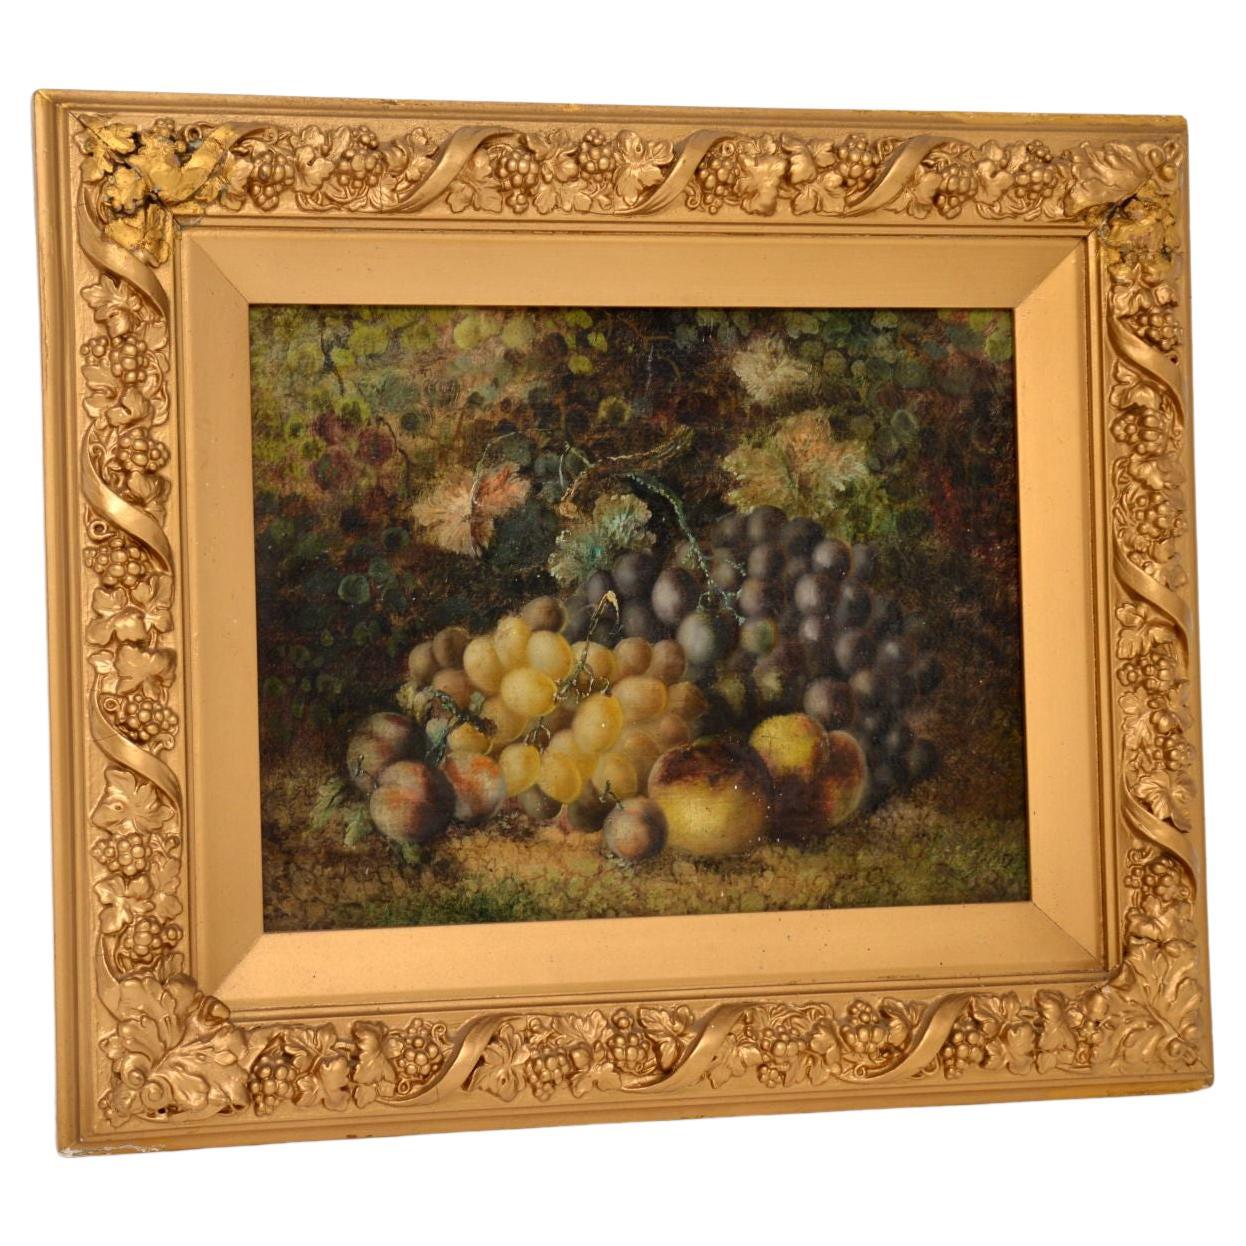 Antique Still Life Oil Painting in a Gilt Wood Frame